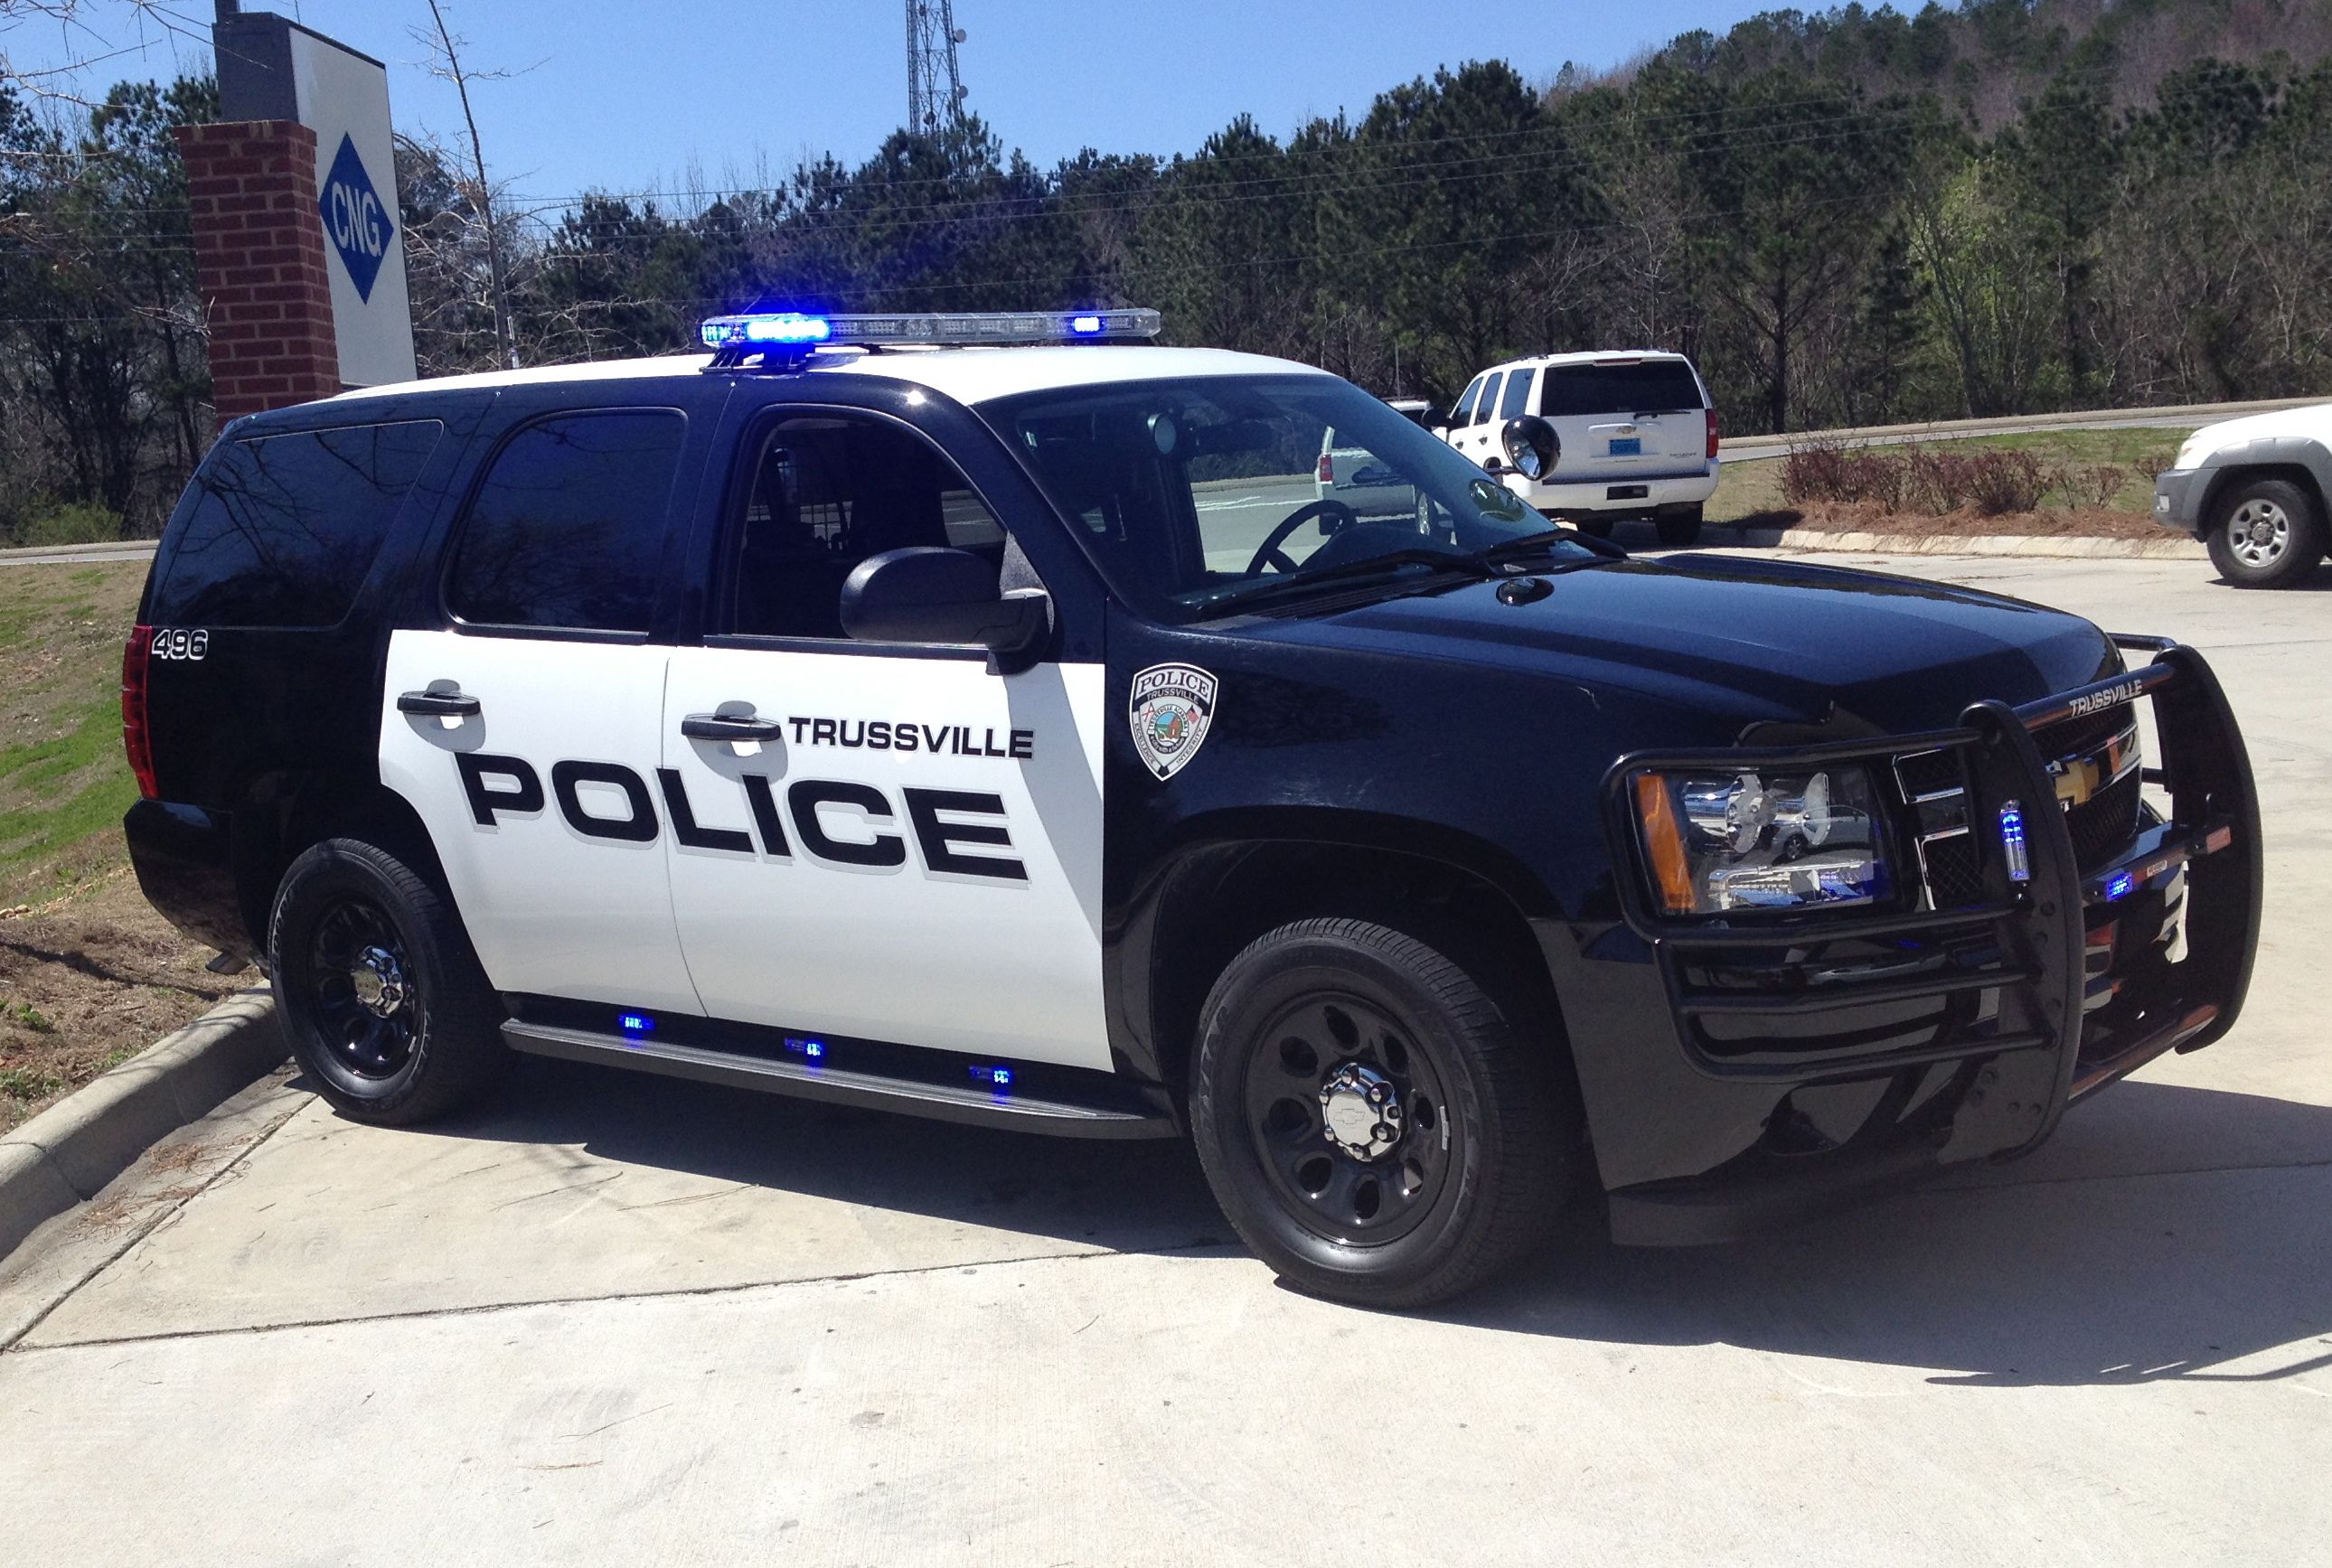 Two arrested on drug charges during raid in Trussville last week